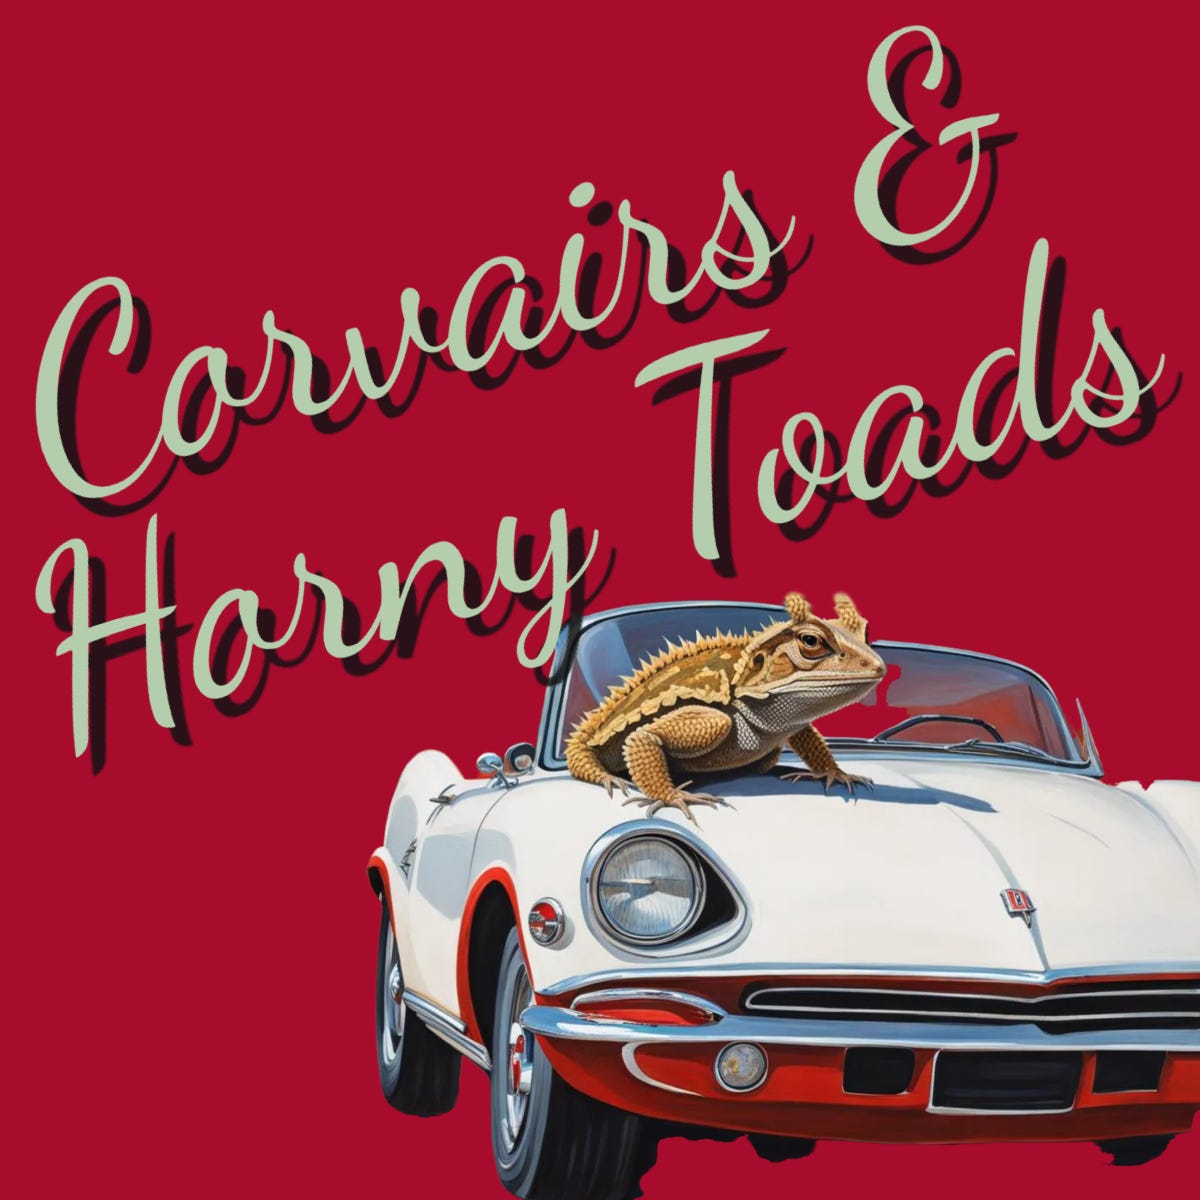 Corvairs & Horny Toads